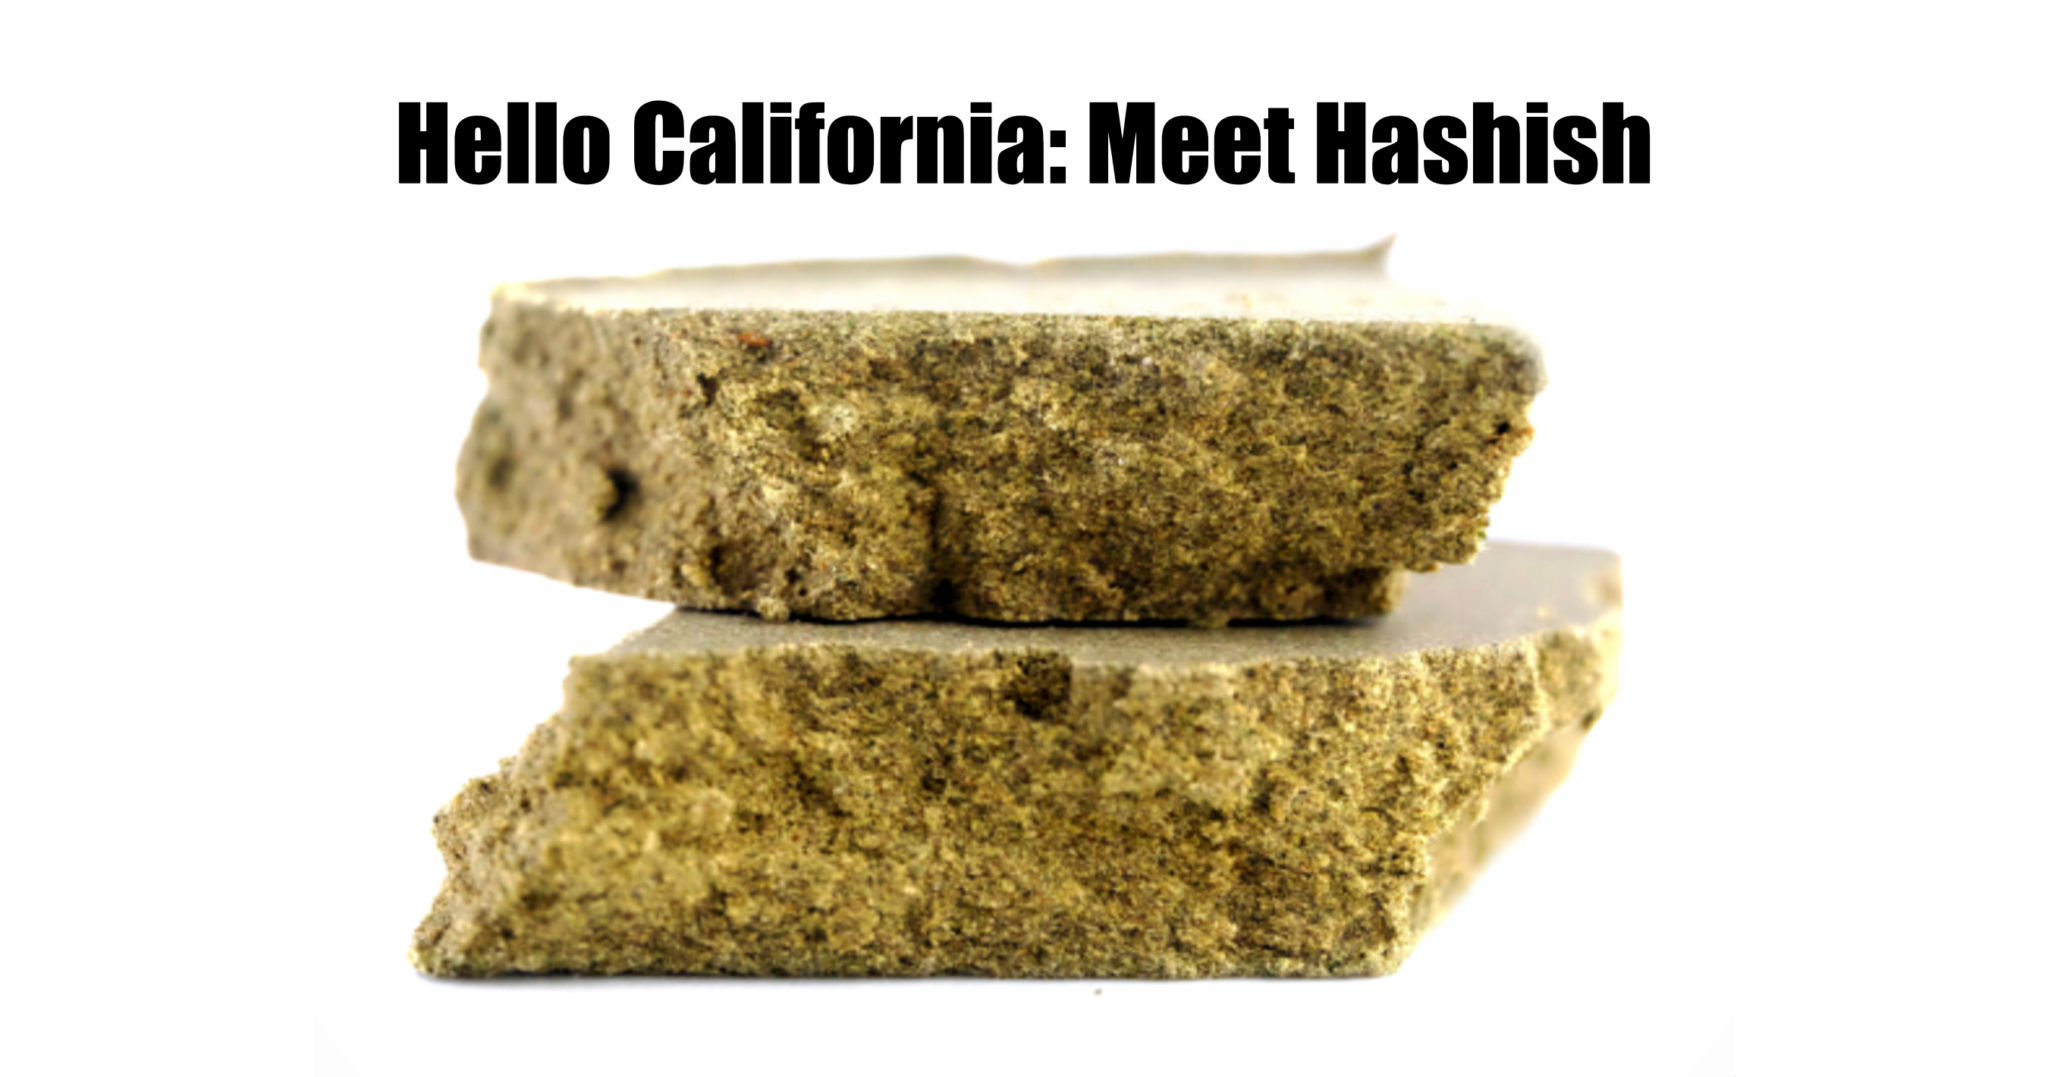 What's the Difference Between Kief vs Hash vs Cannabis?